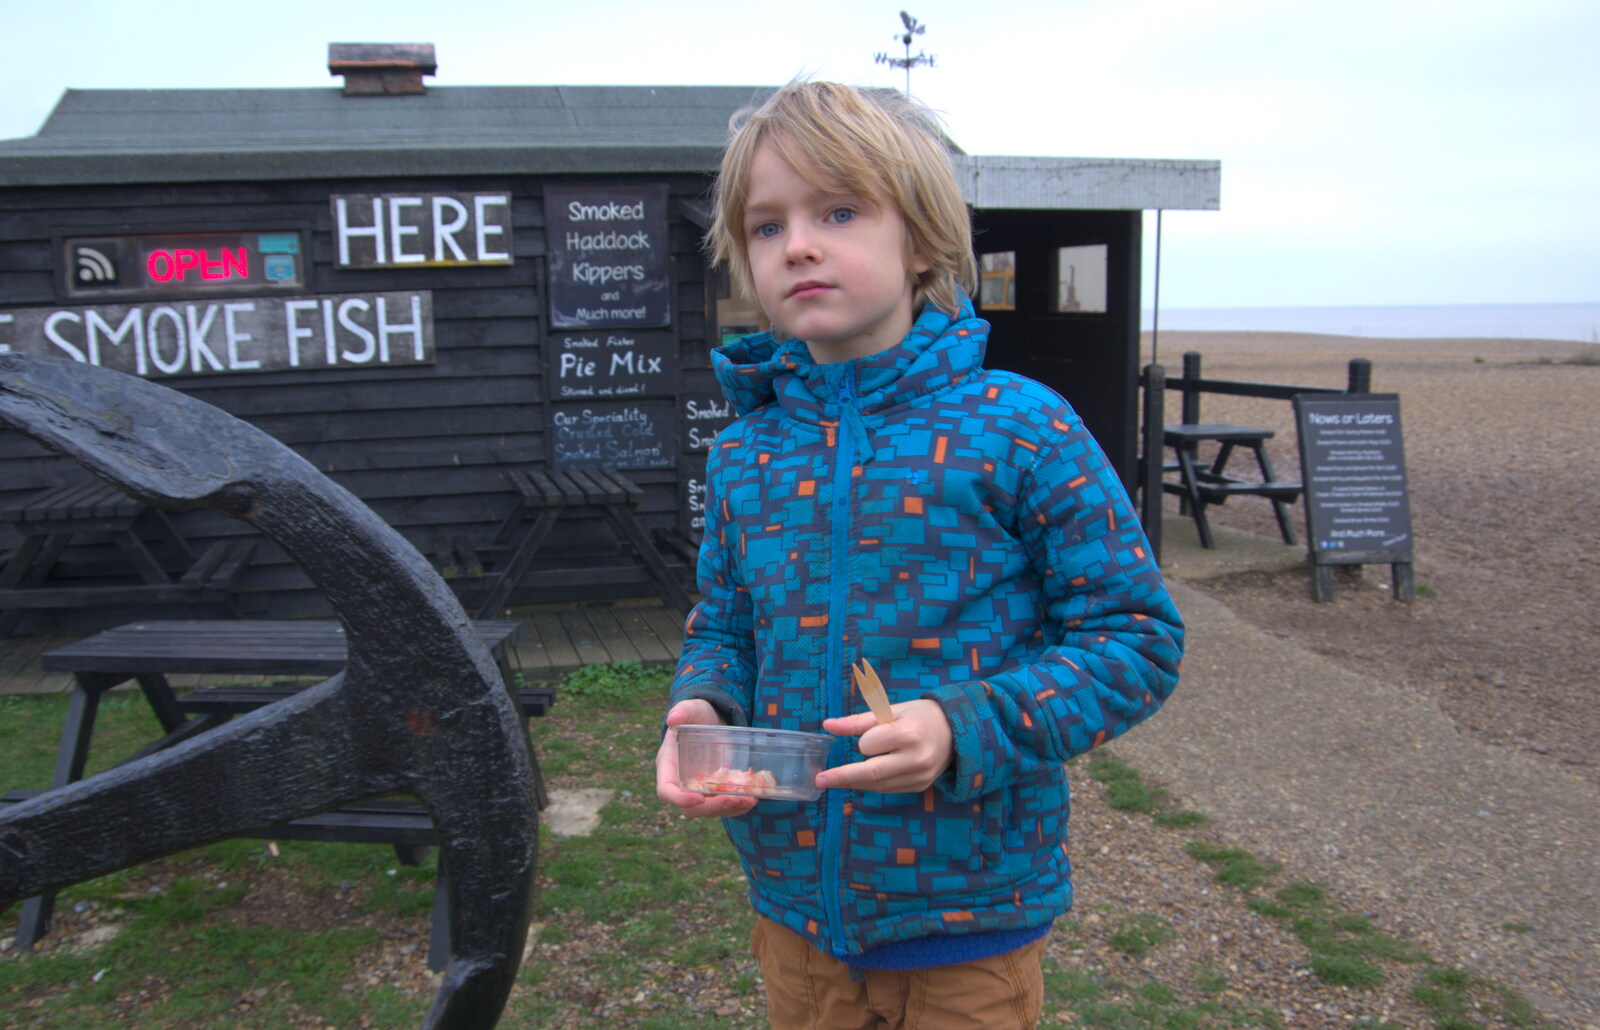 Harry roams around with his tub of seafood from A Postcard from Aldeburgh, Suffolk - 6th January 2019